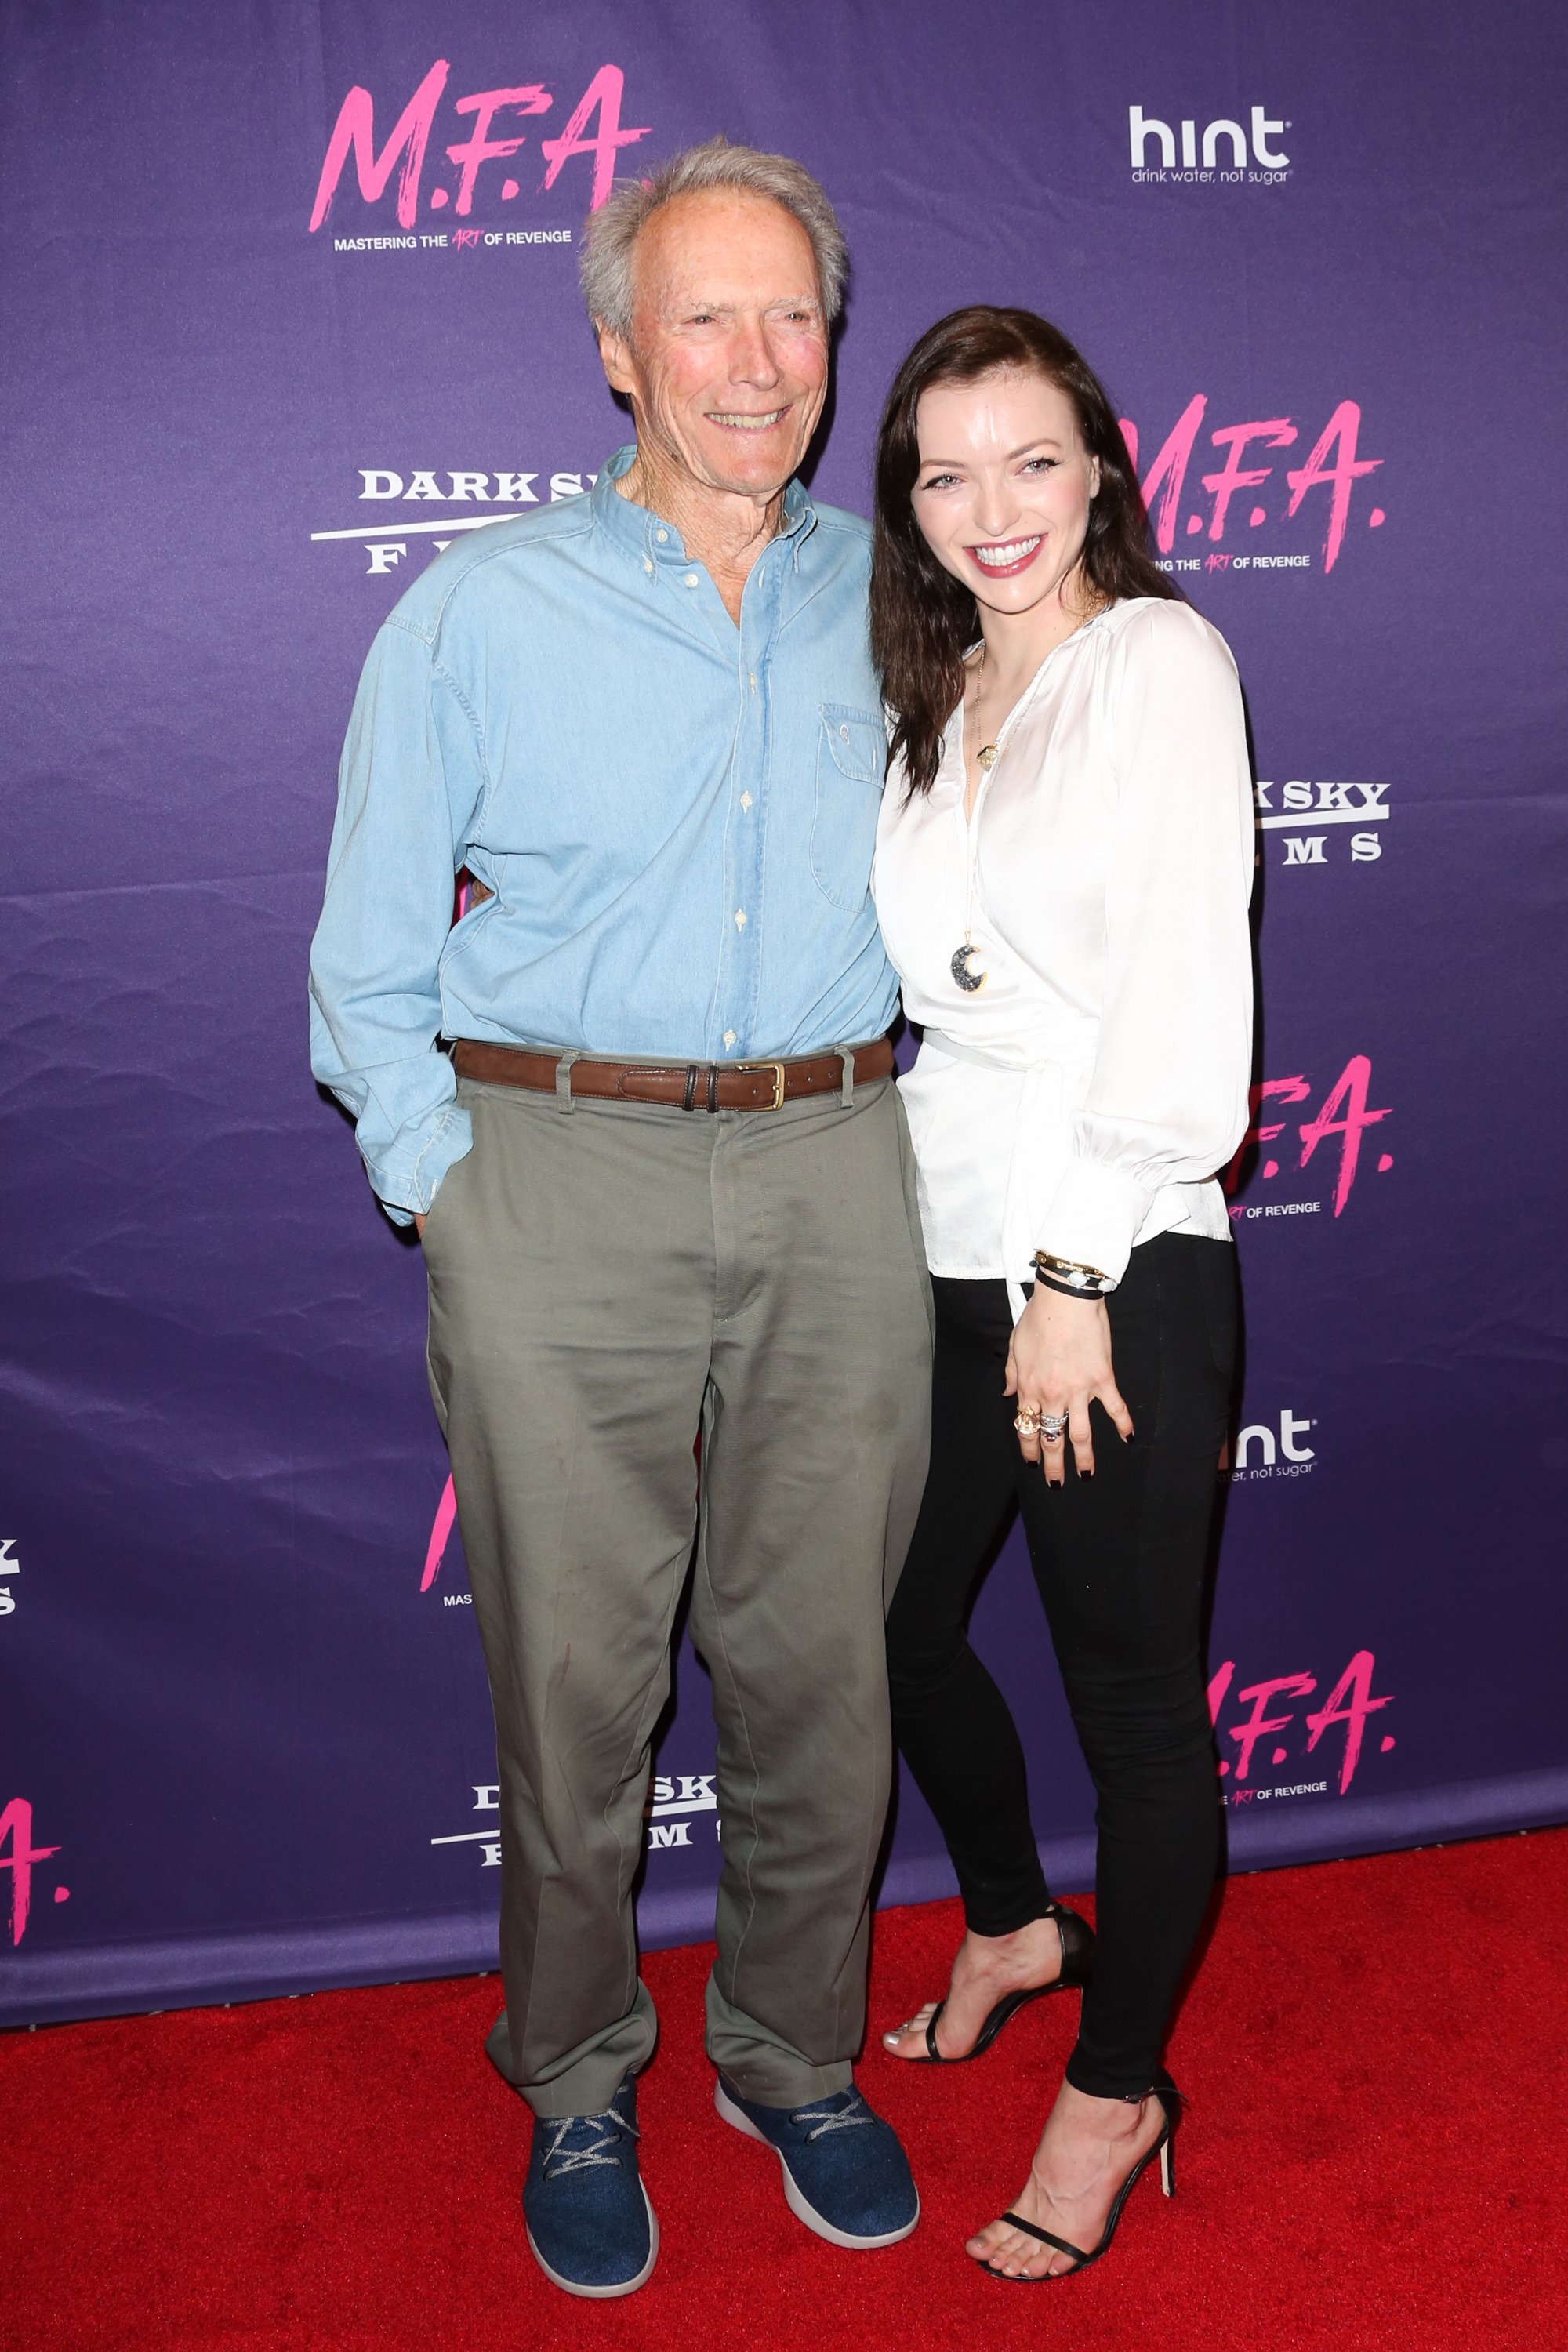 Clint Eastwood and his daughter Francesca Eastwood attend the premiere of Dark Sky Films' "M.F.A." at The London West Hollywood on October 2, 2017, in West Hollywood, California. | Source: Getty Images